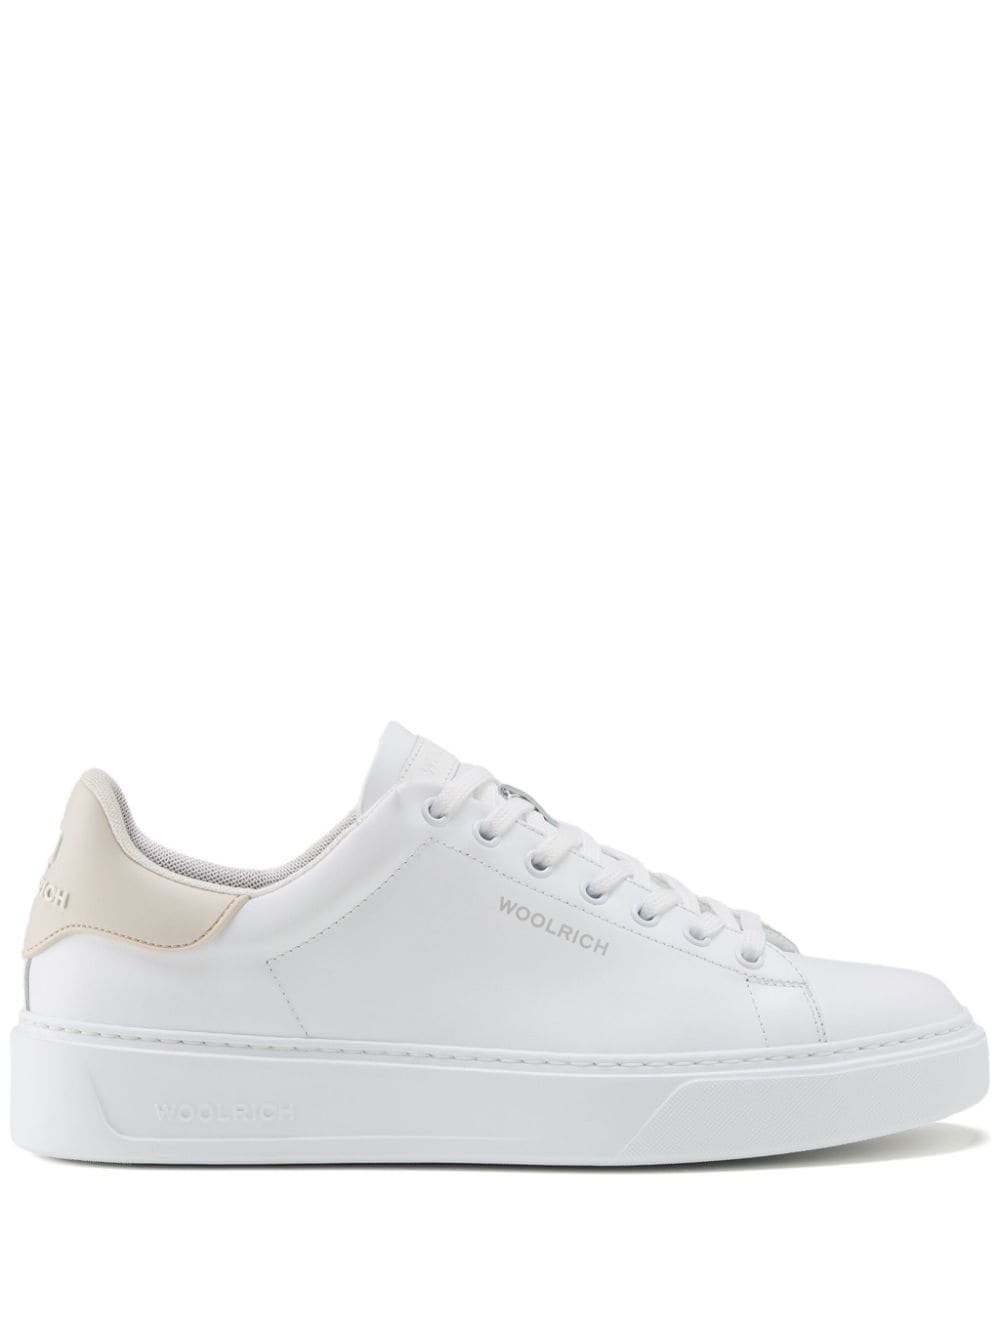 Woolrich Classic Court leather sneakers - White von Woolrich